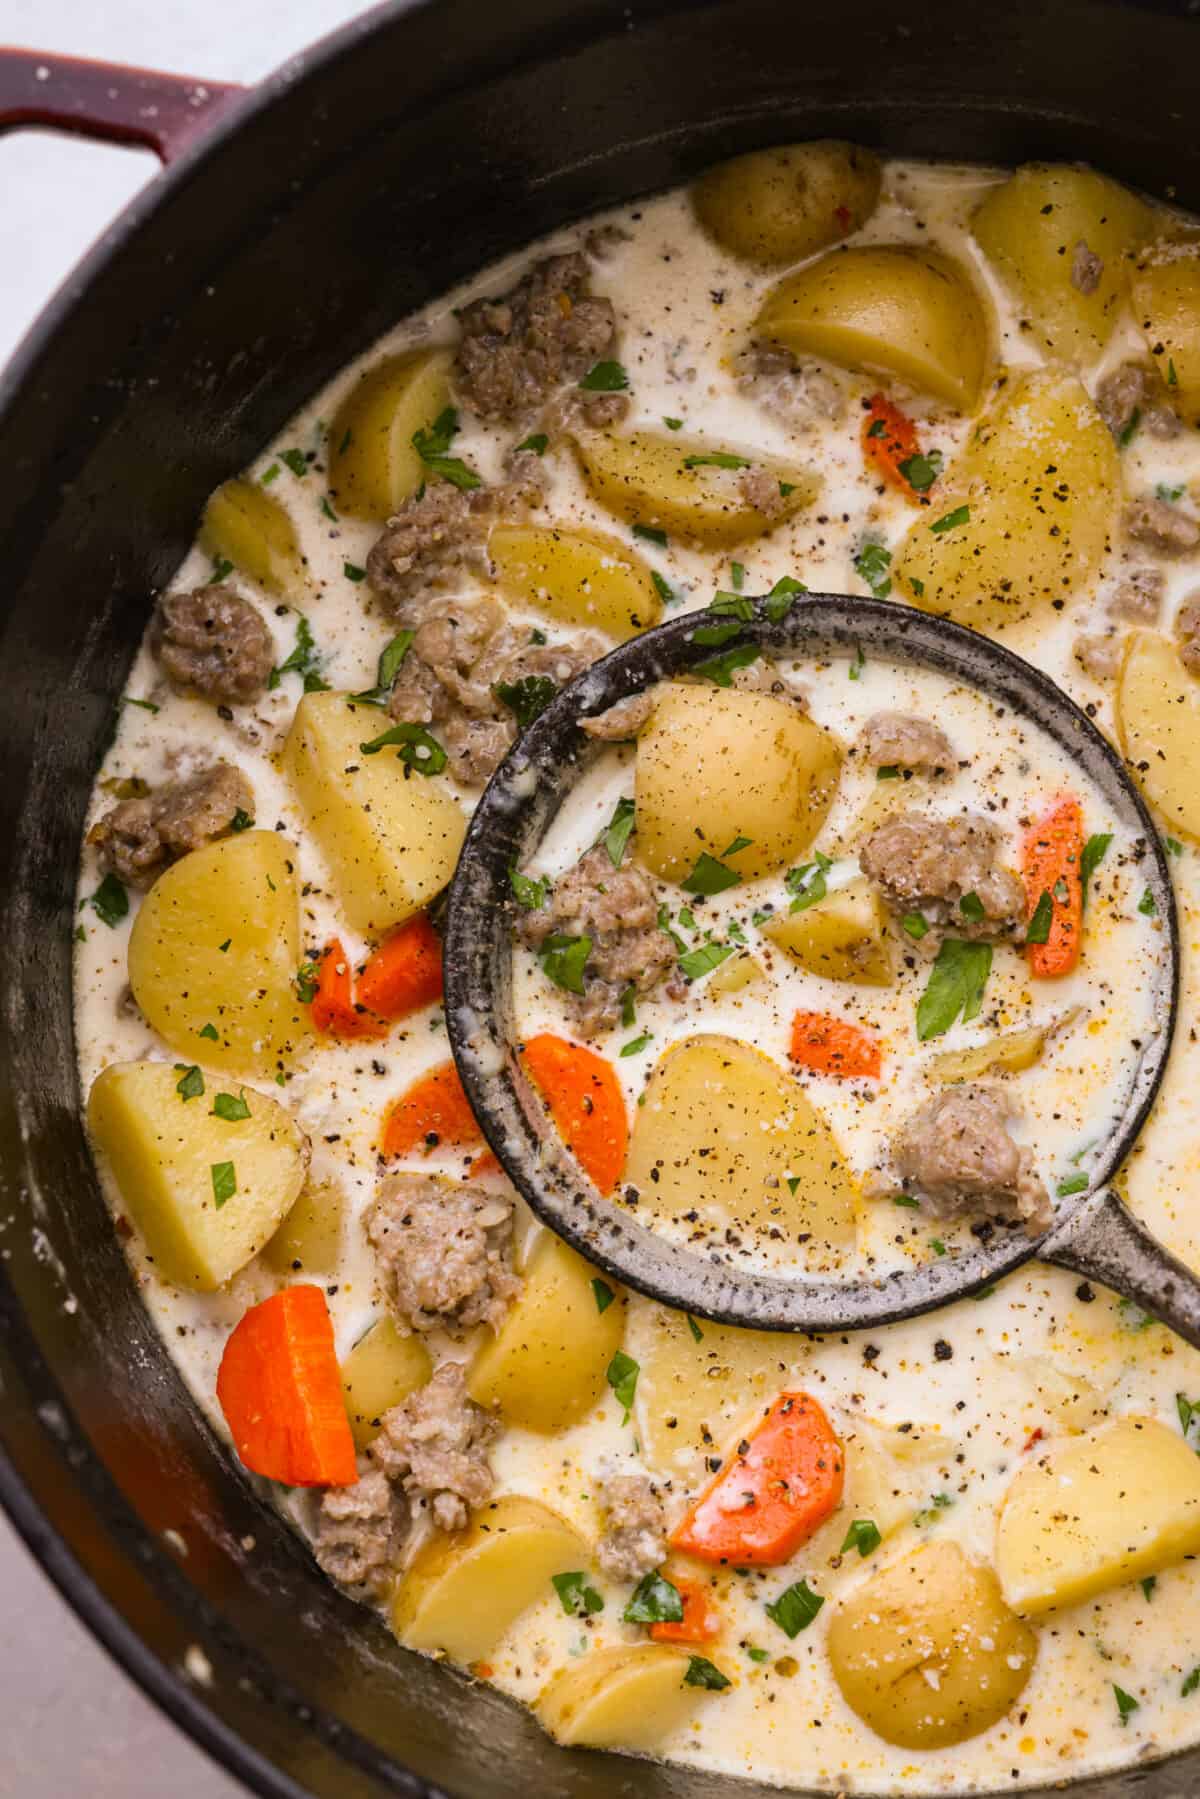 Creamy sausage and potato soup in a large pot, being scooped up with a ladle.